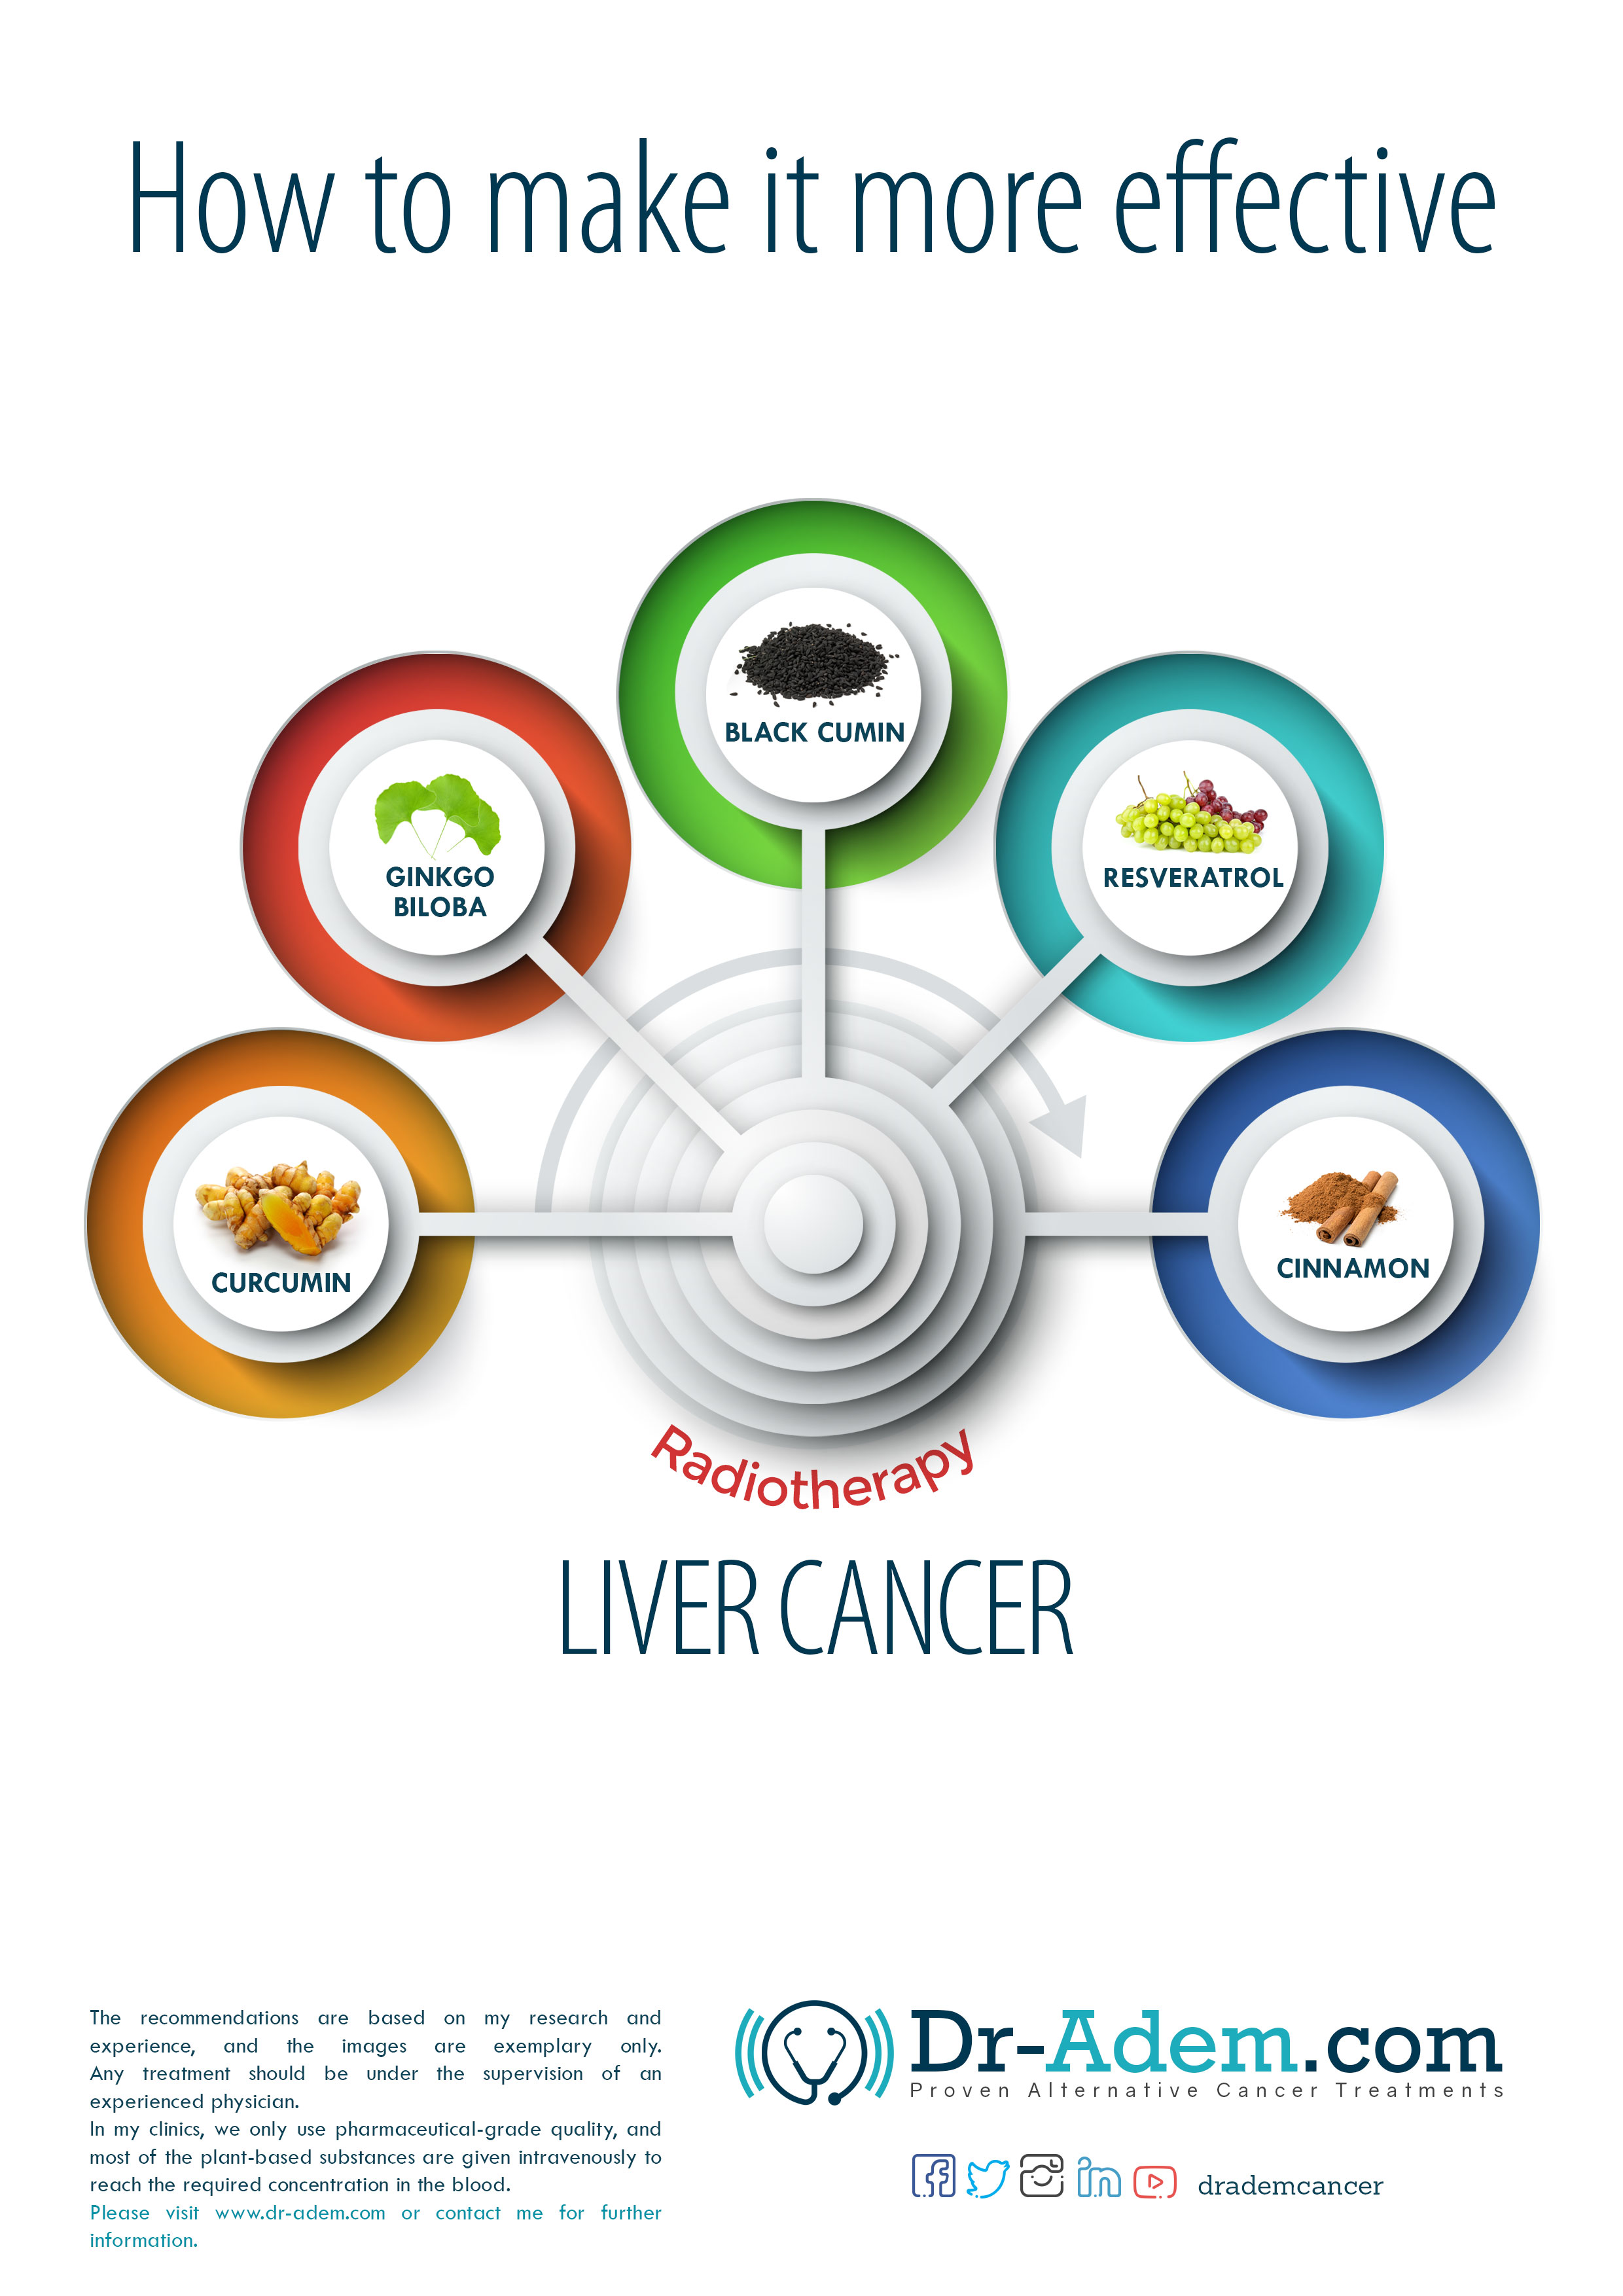 Radiotherapy For Liver Cancer